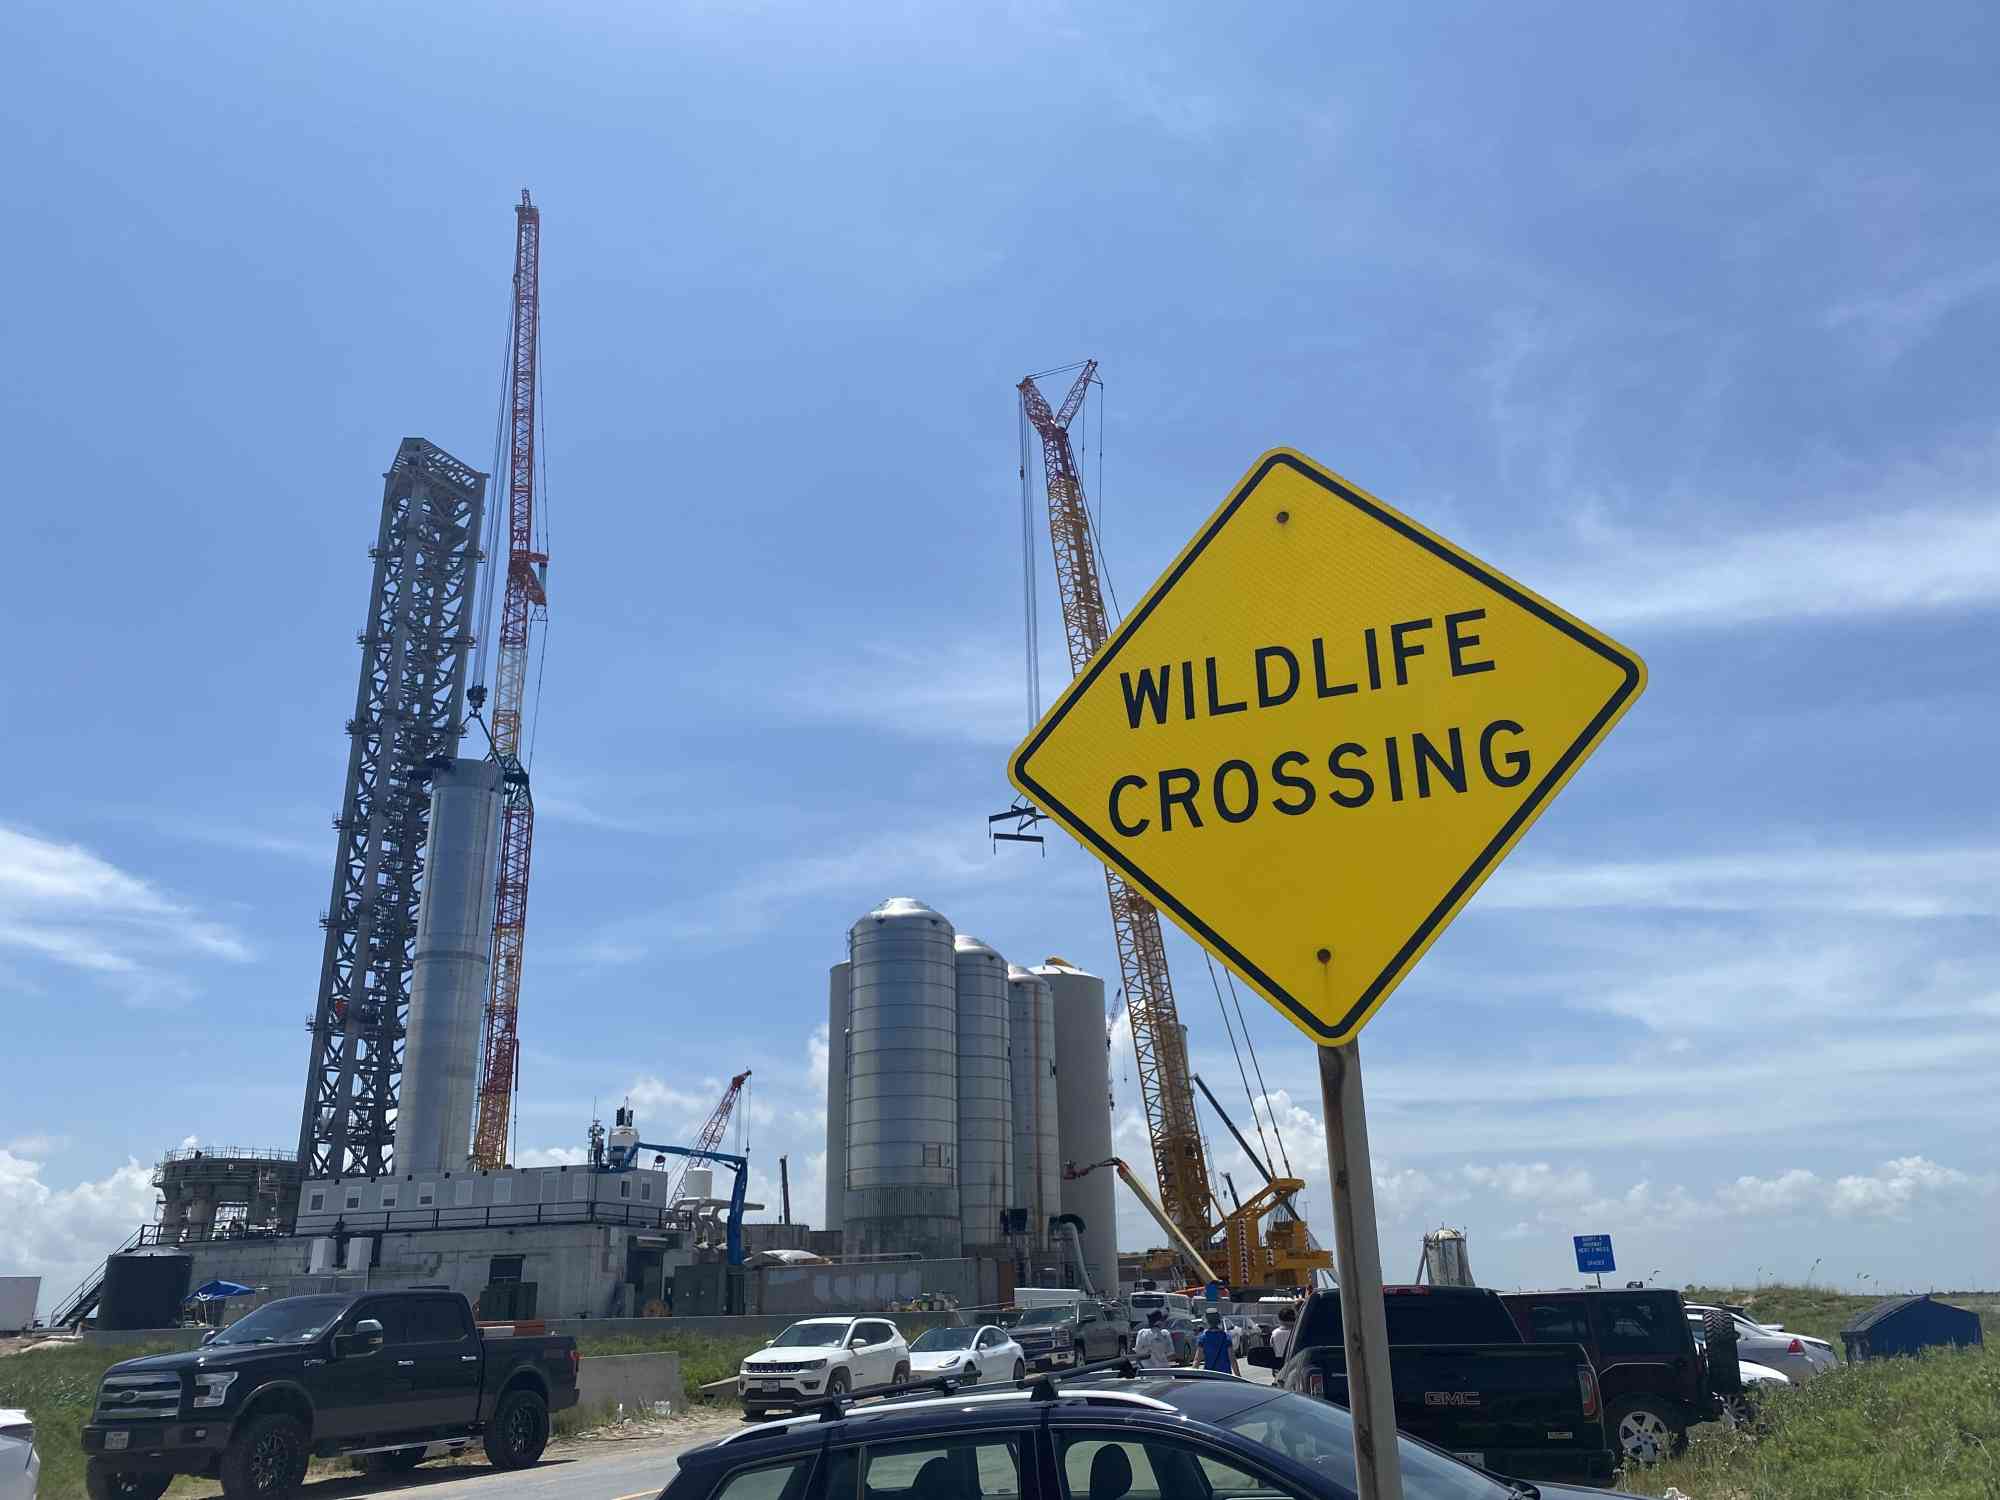 Wildlife Crossing Sign at Launch Site - SpaceX Launch Site - Boca Chica - Texas 